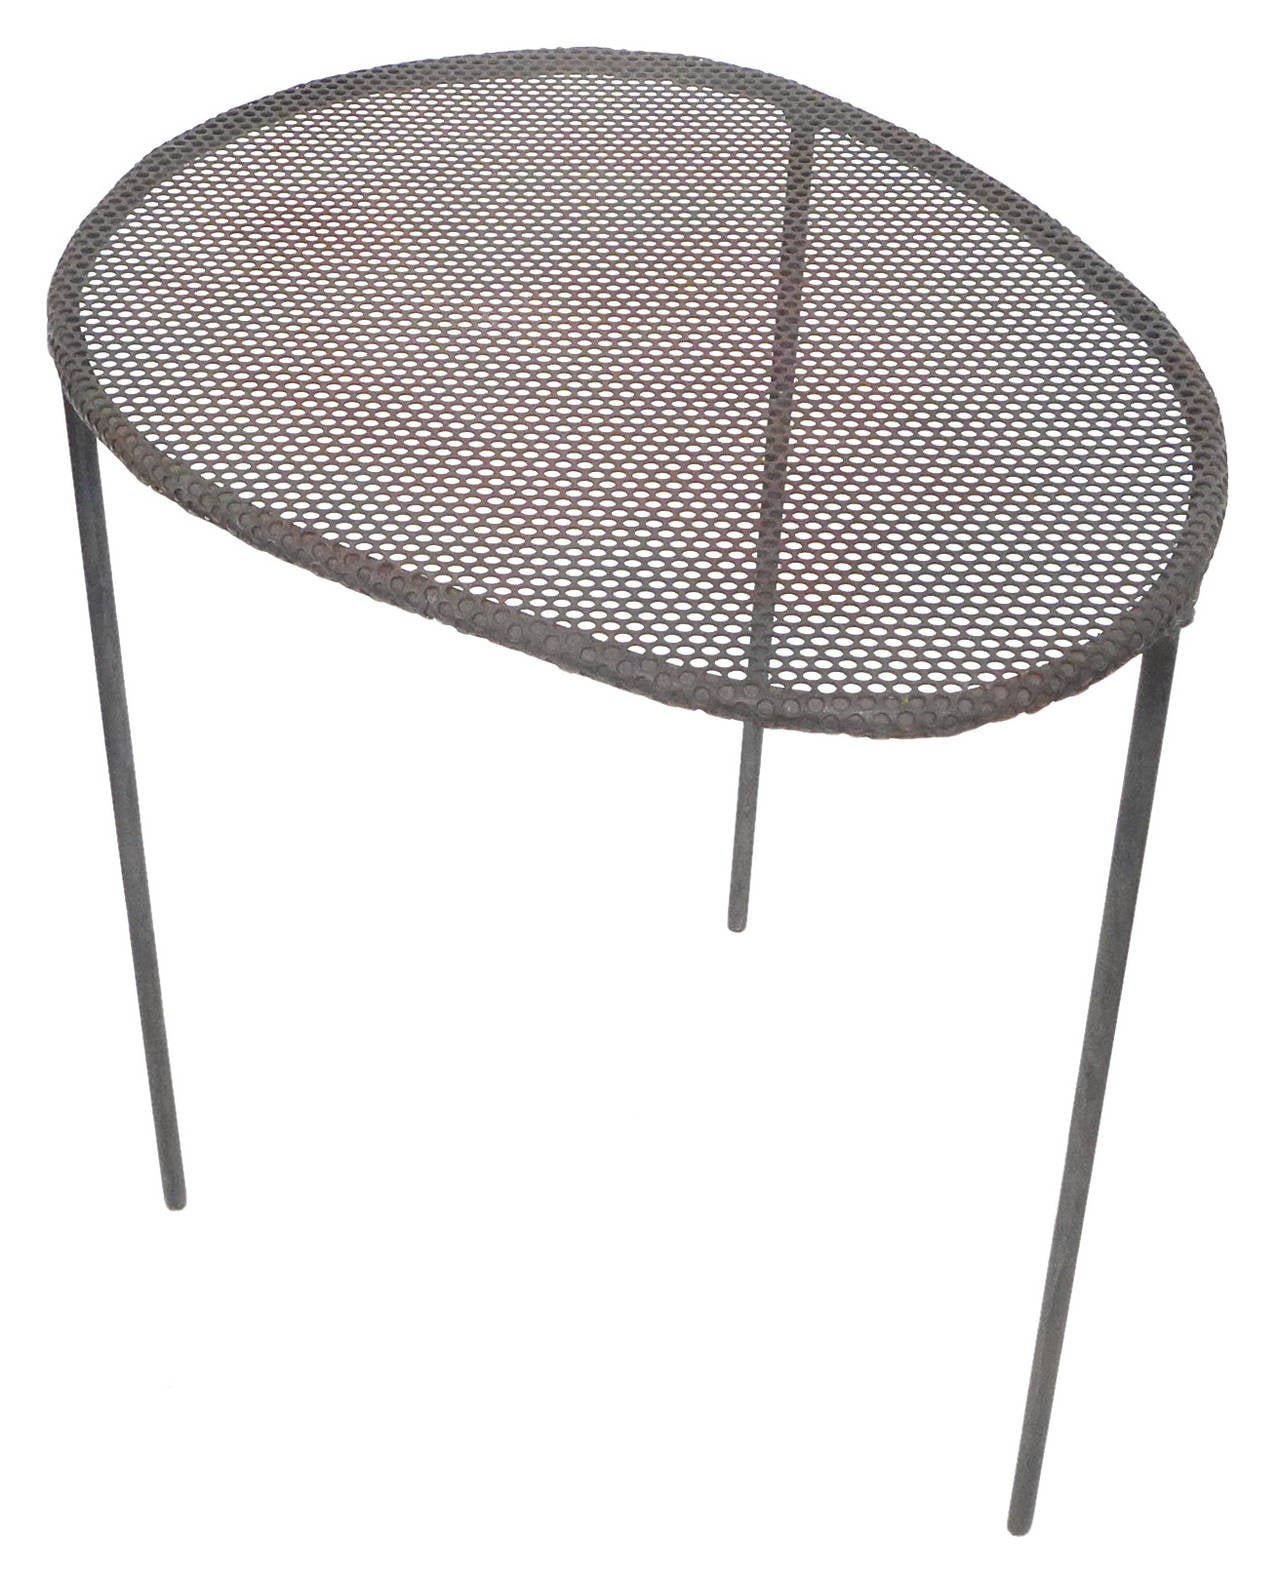 A whimsical. perforated, welded steel side table.  A wonderfully playful, slight, 3-legged, biomorphic form of unmistakable Mategot intention with a nice patina, likely from time outdoors.  A beautifully executed, alluring decorative element.